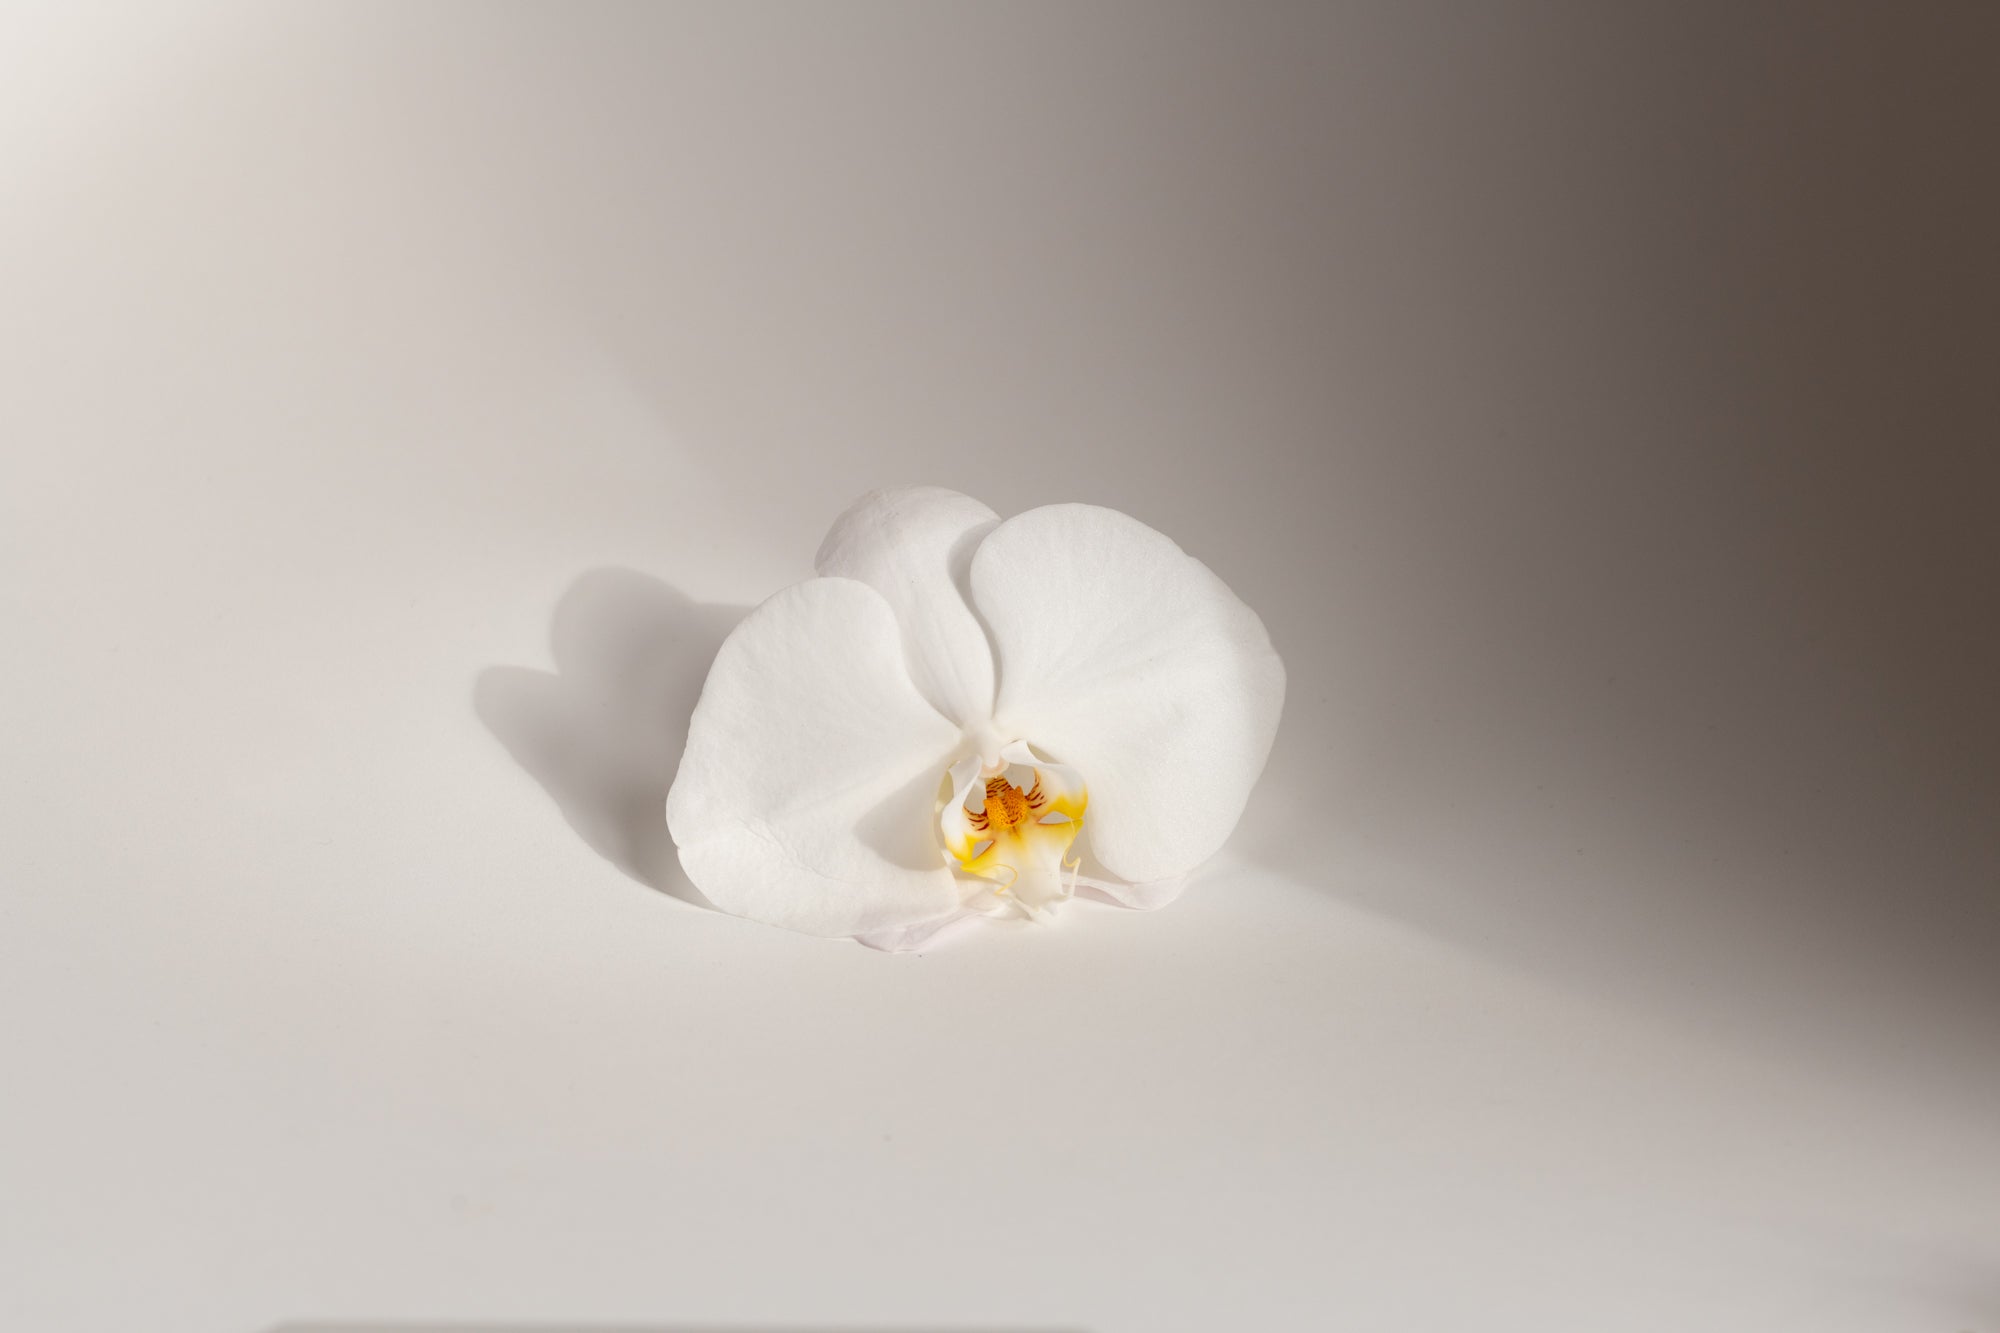 Orchid flowers on plain background